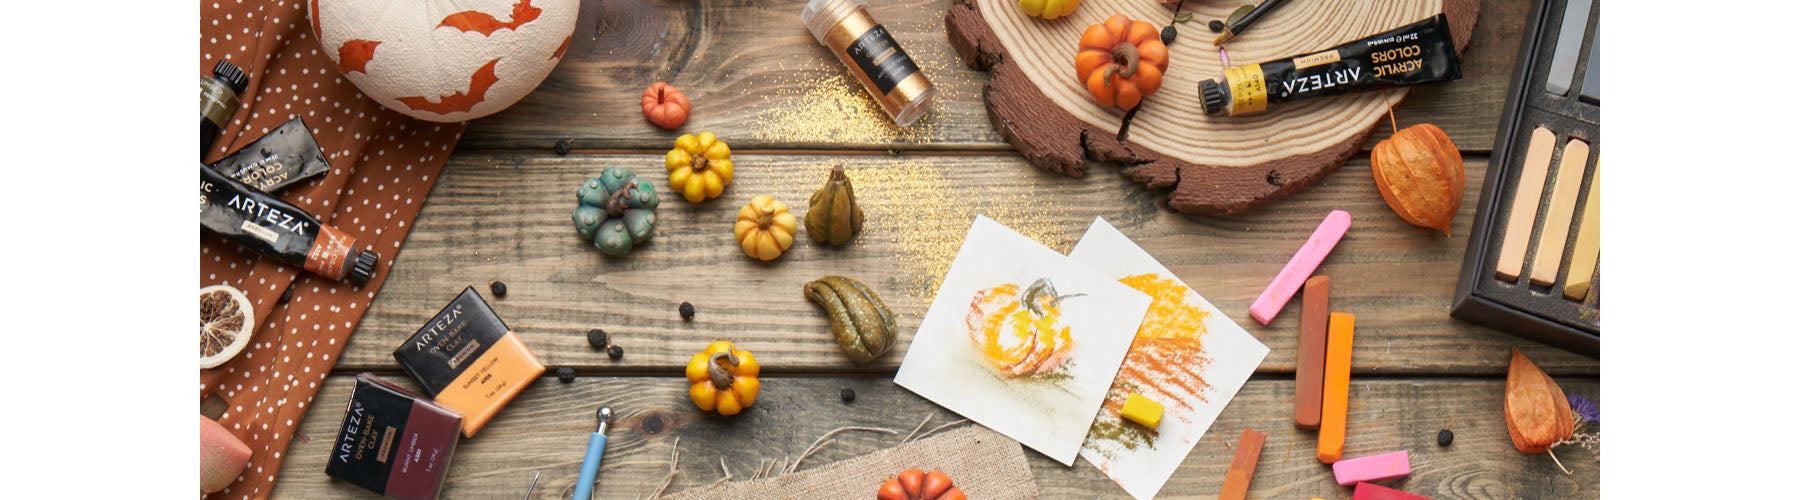 Get Crafty This Fall!